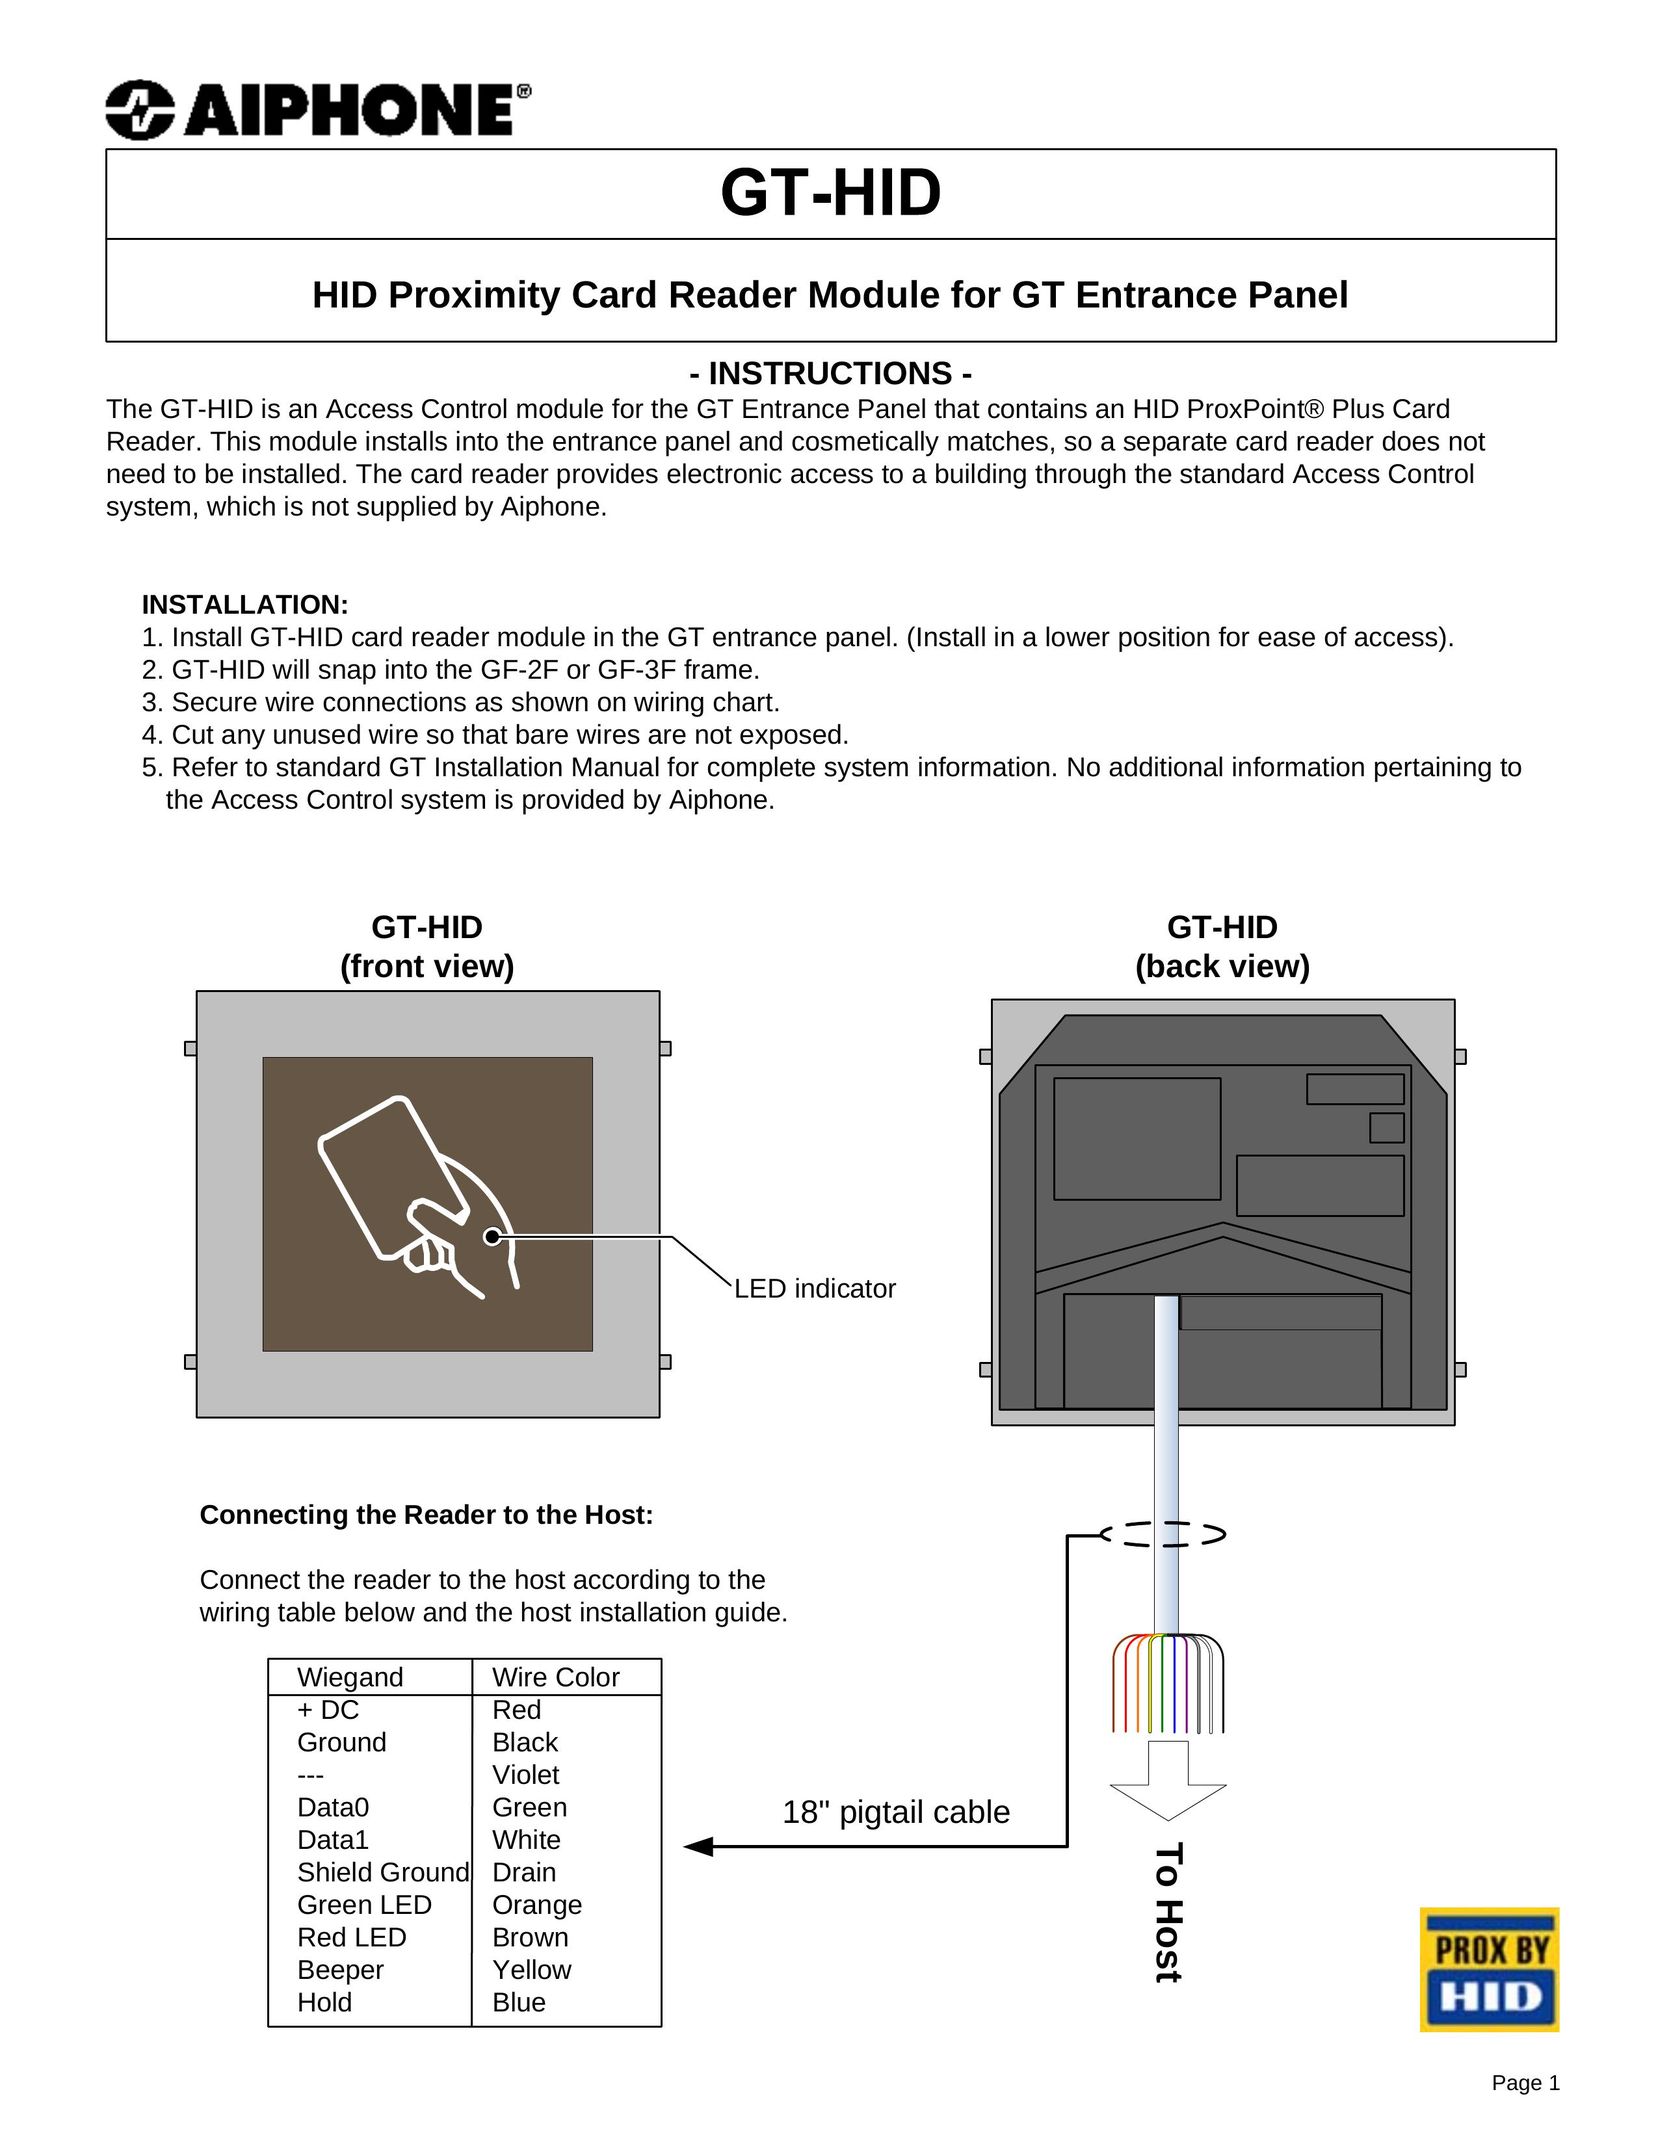 Aiphone GT-HID Network Router User Manual